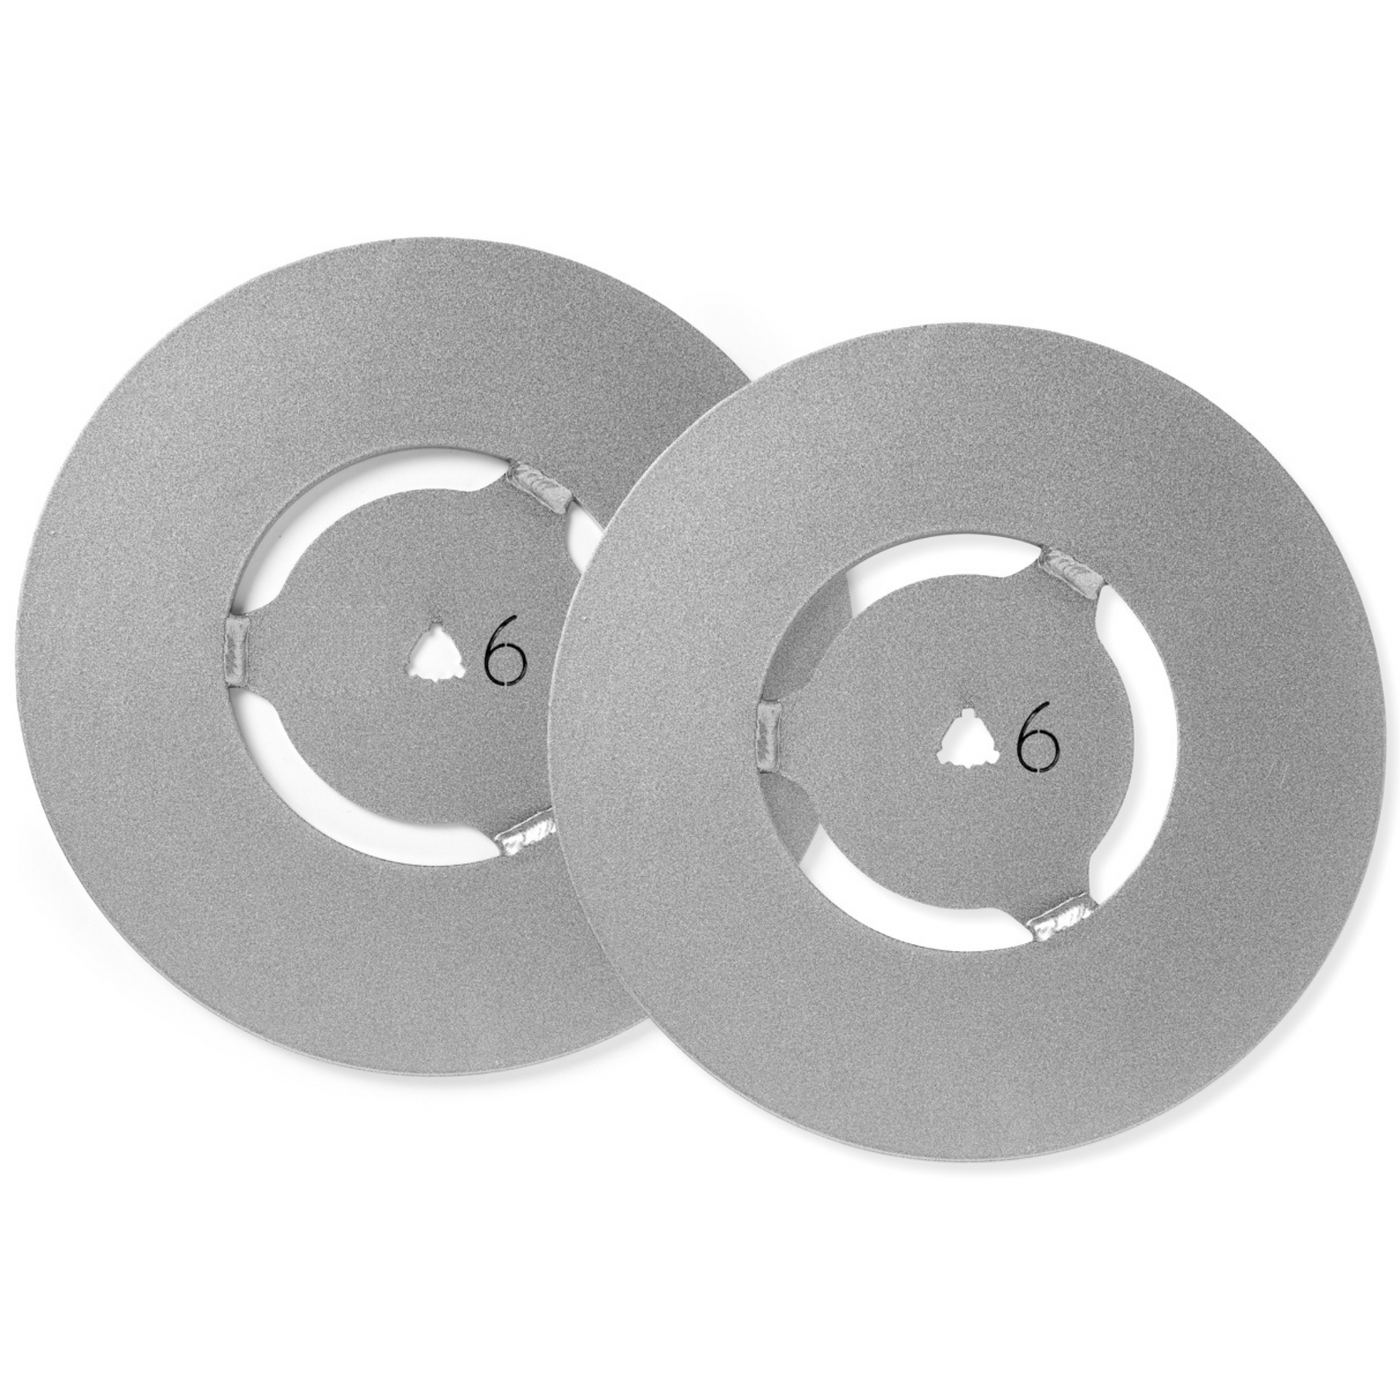 Disc set 6mm (Not compatible in Kynett HOME & ONE!)